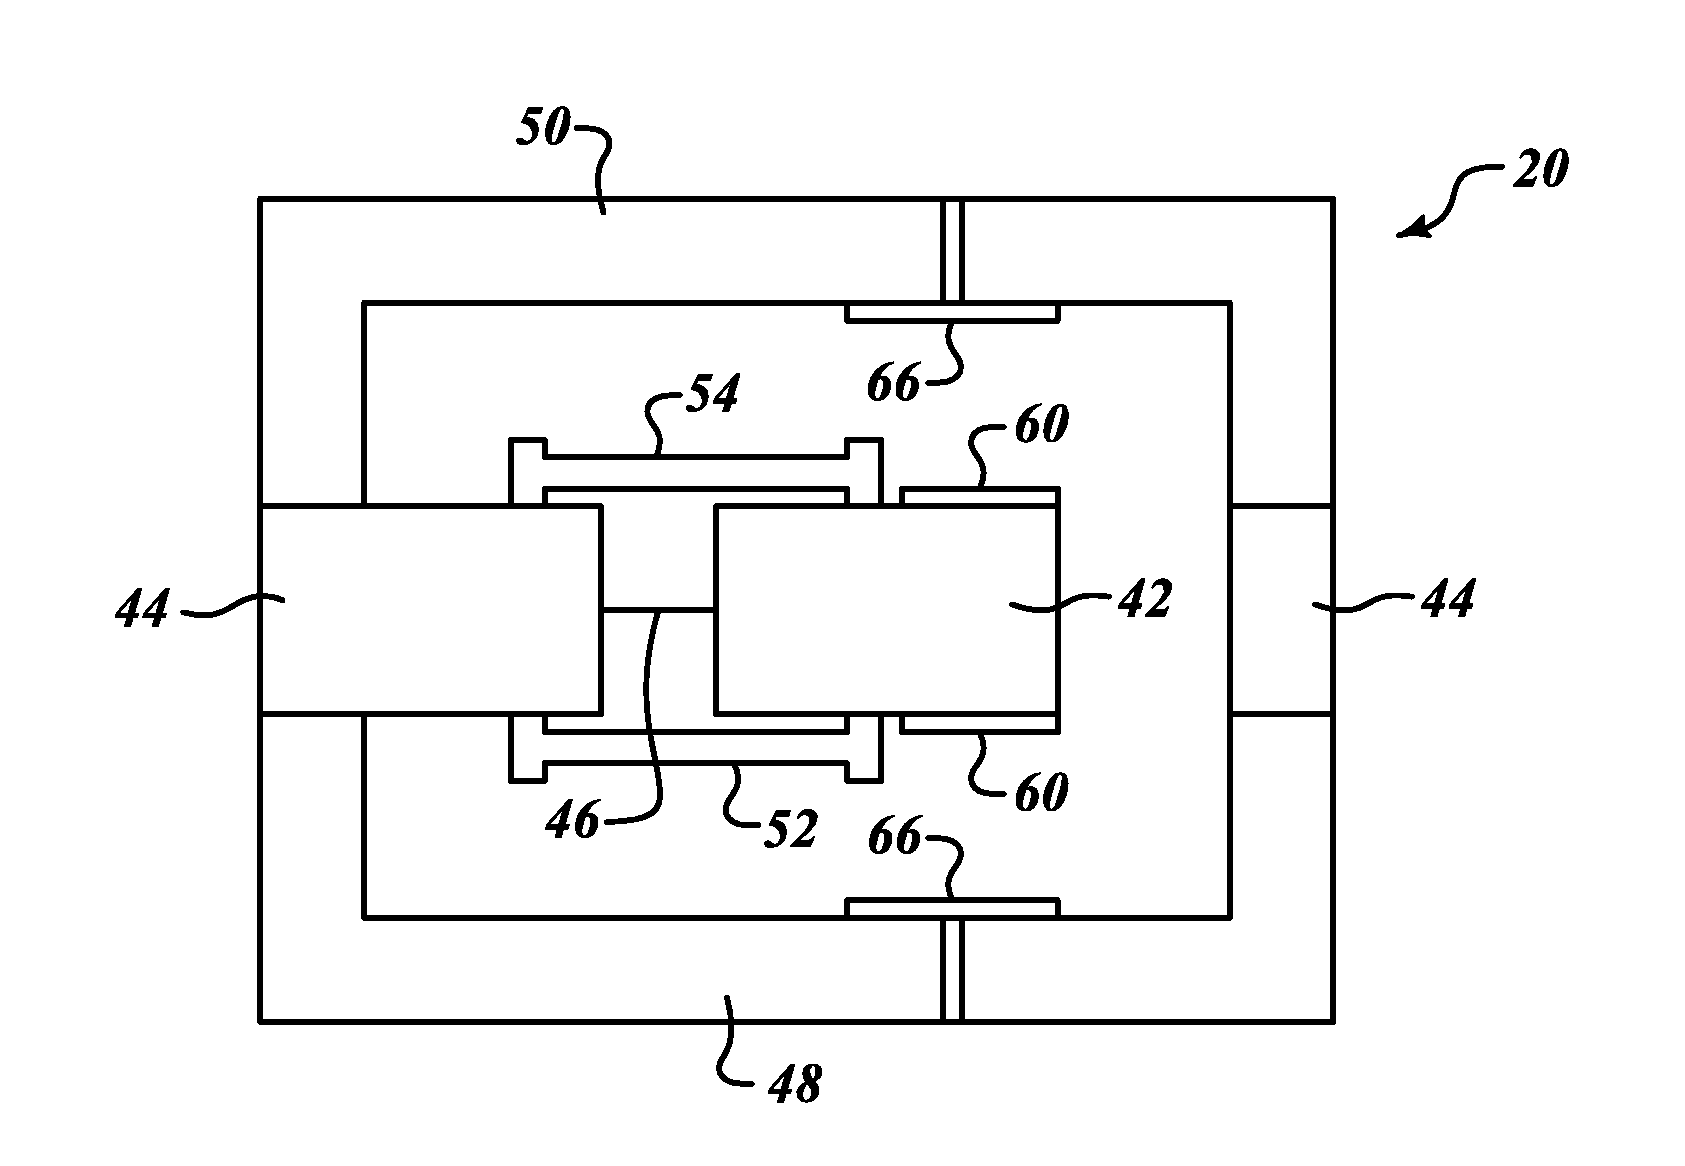 Methods and apparatus for improving performance of an accelerometer